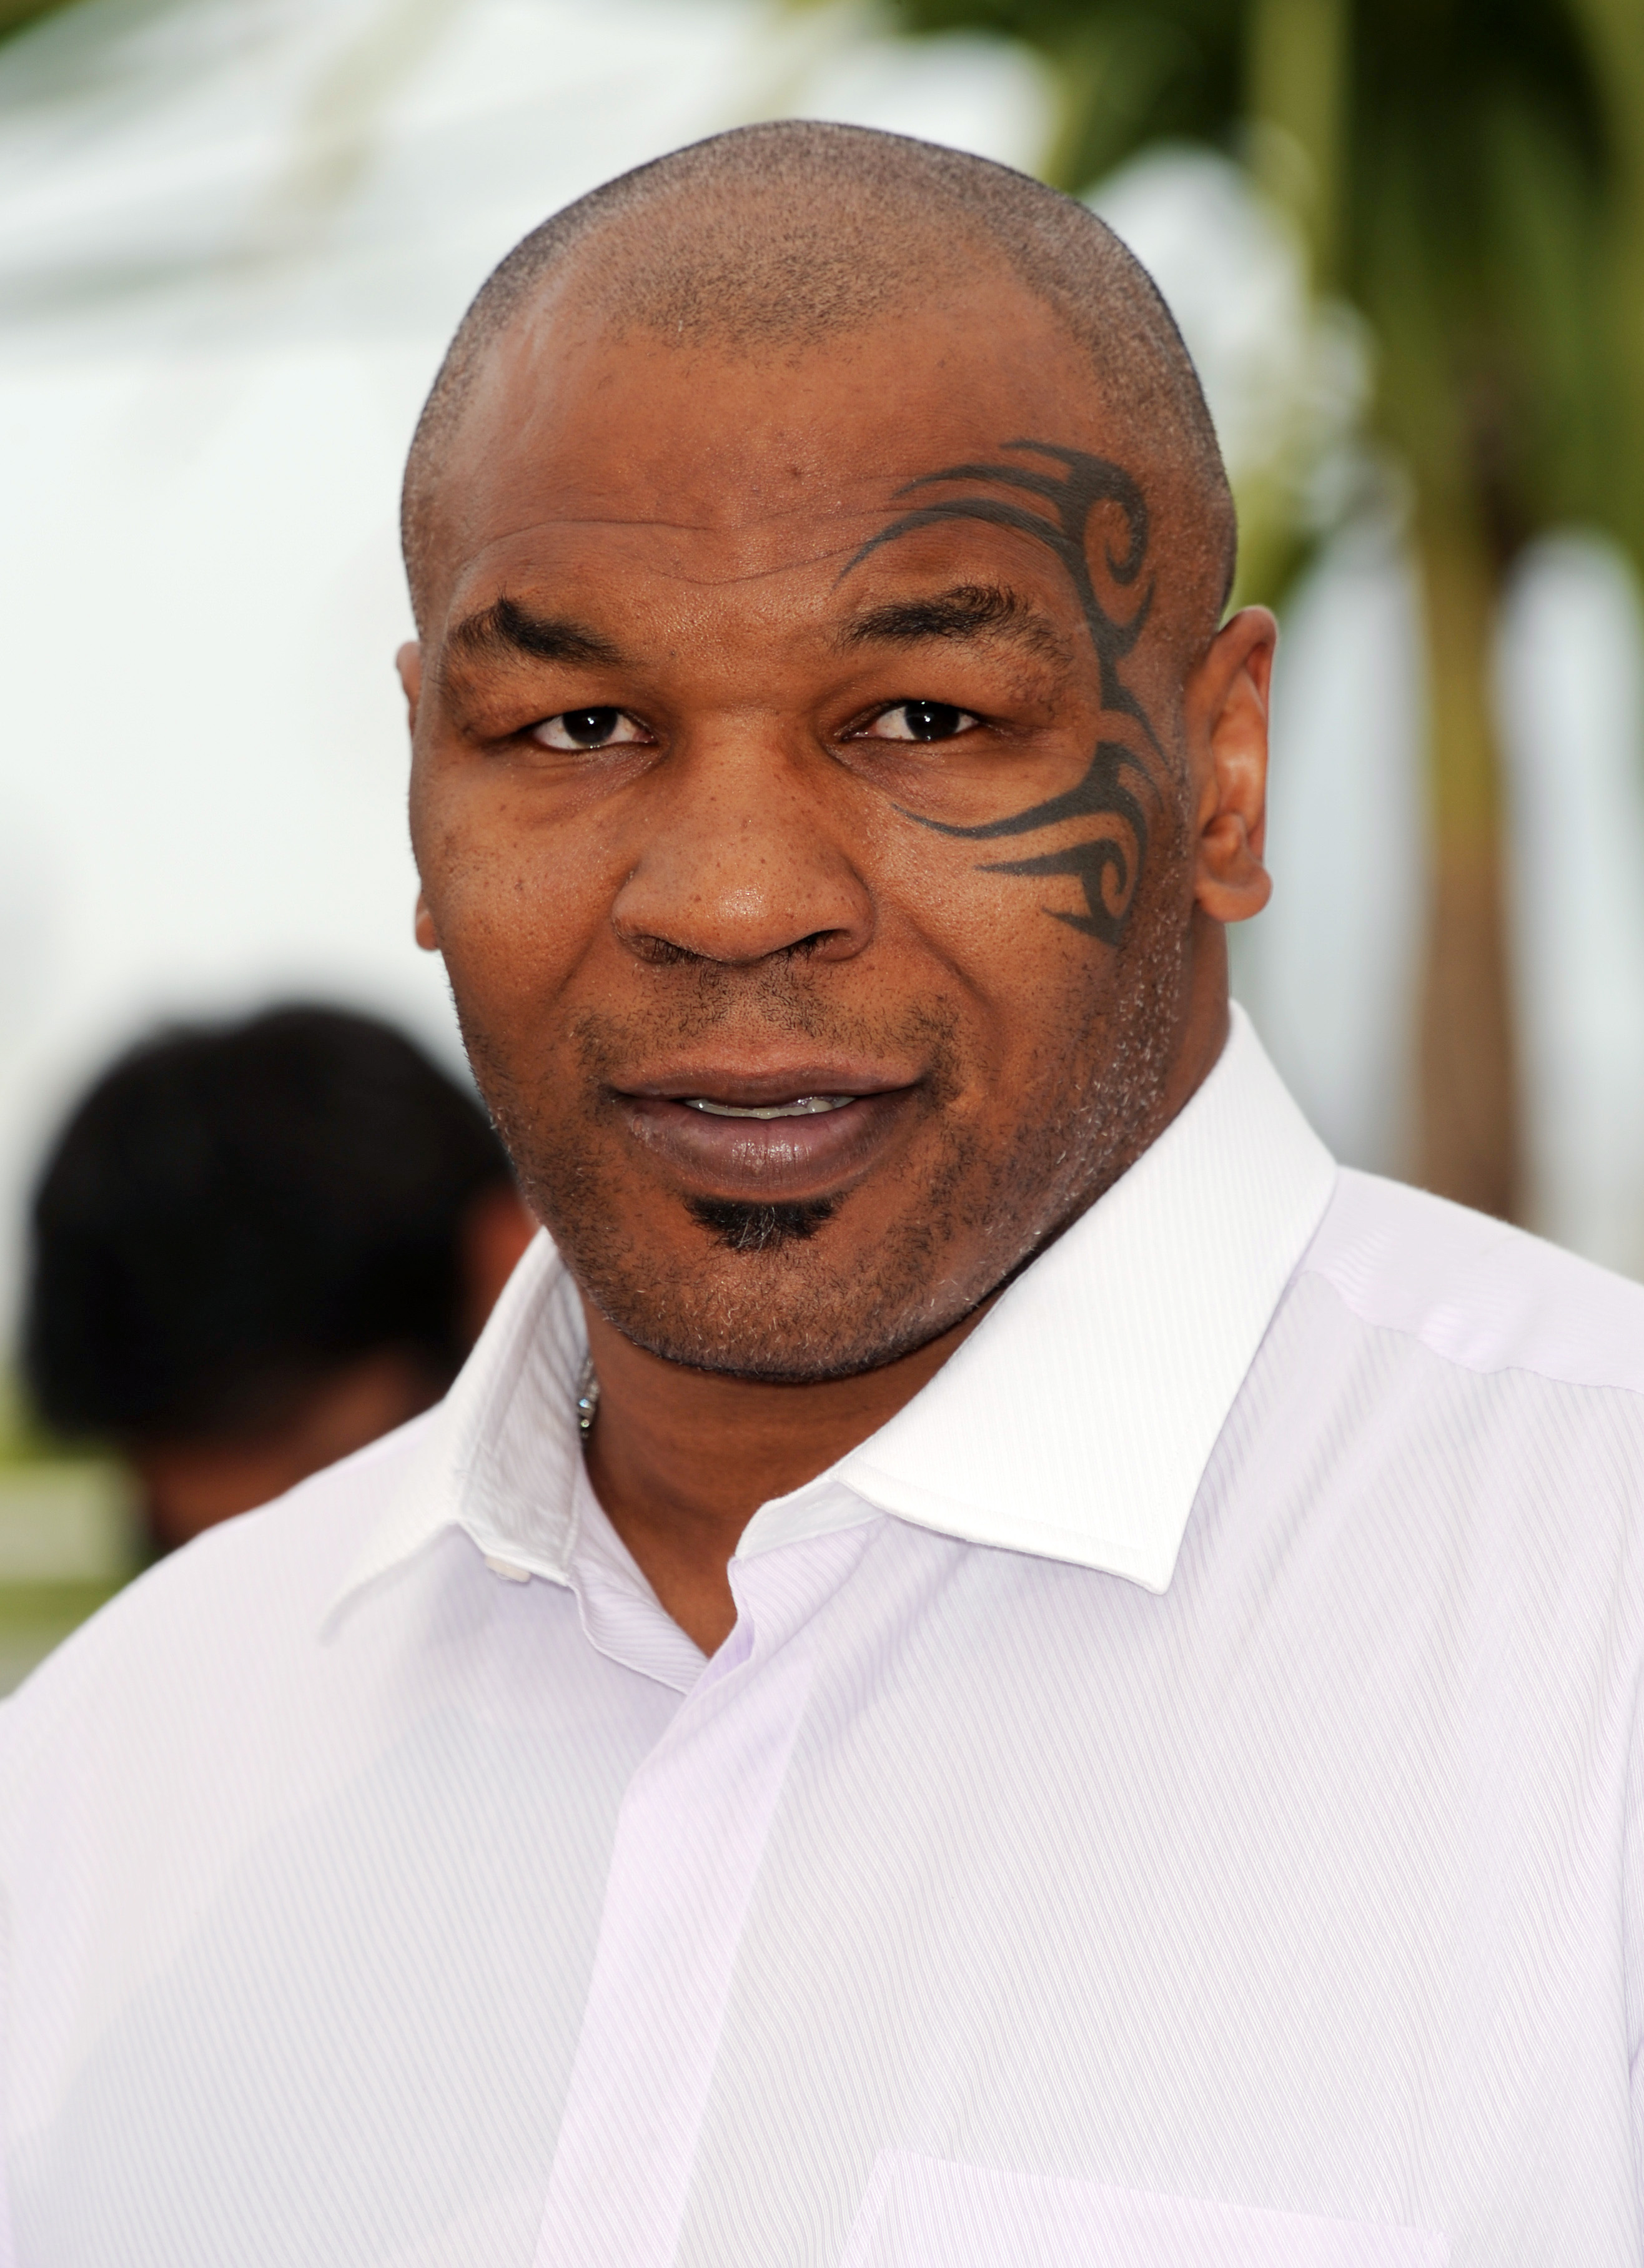 Mike Tyson at the Palais Des Festivals during the 61st International Cannes Film Festival on May 17, 2008, in Cannes, France, attending the "Tyson" documentary photocall | Source: Getty Images